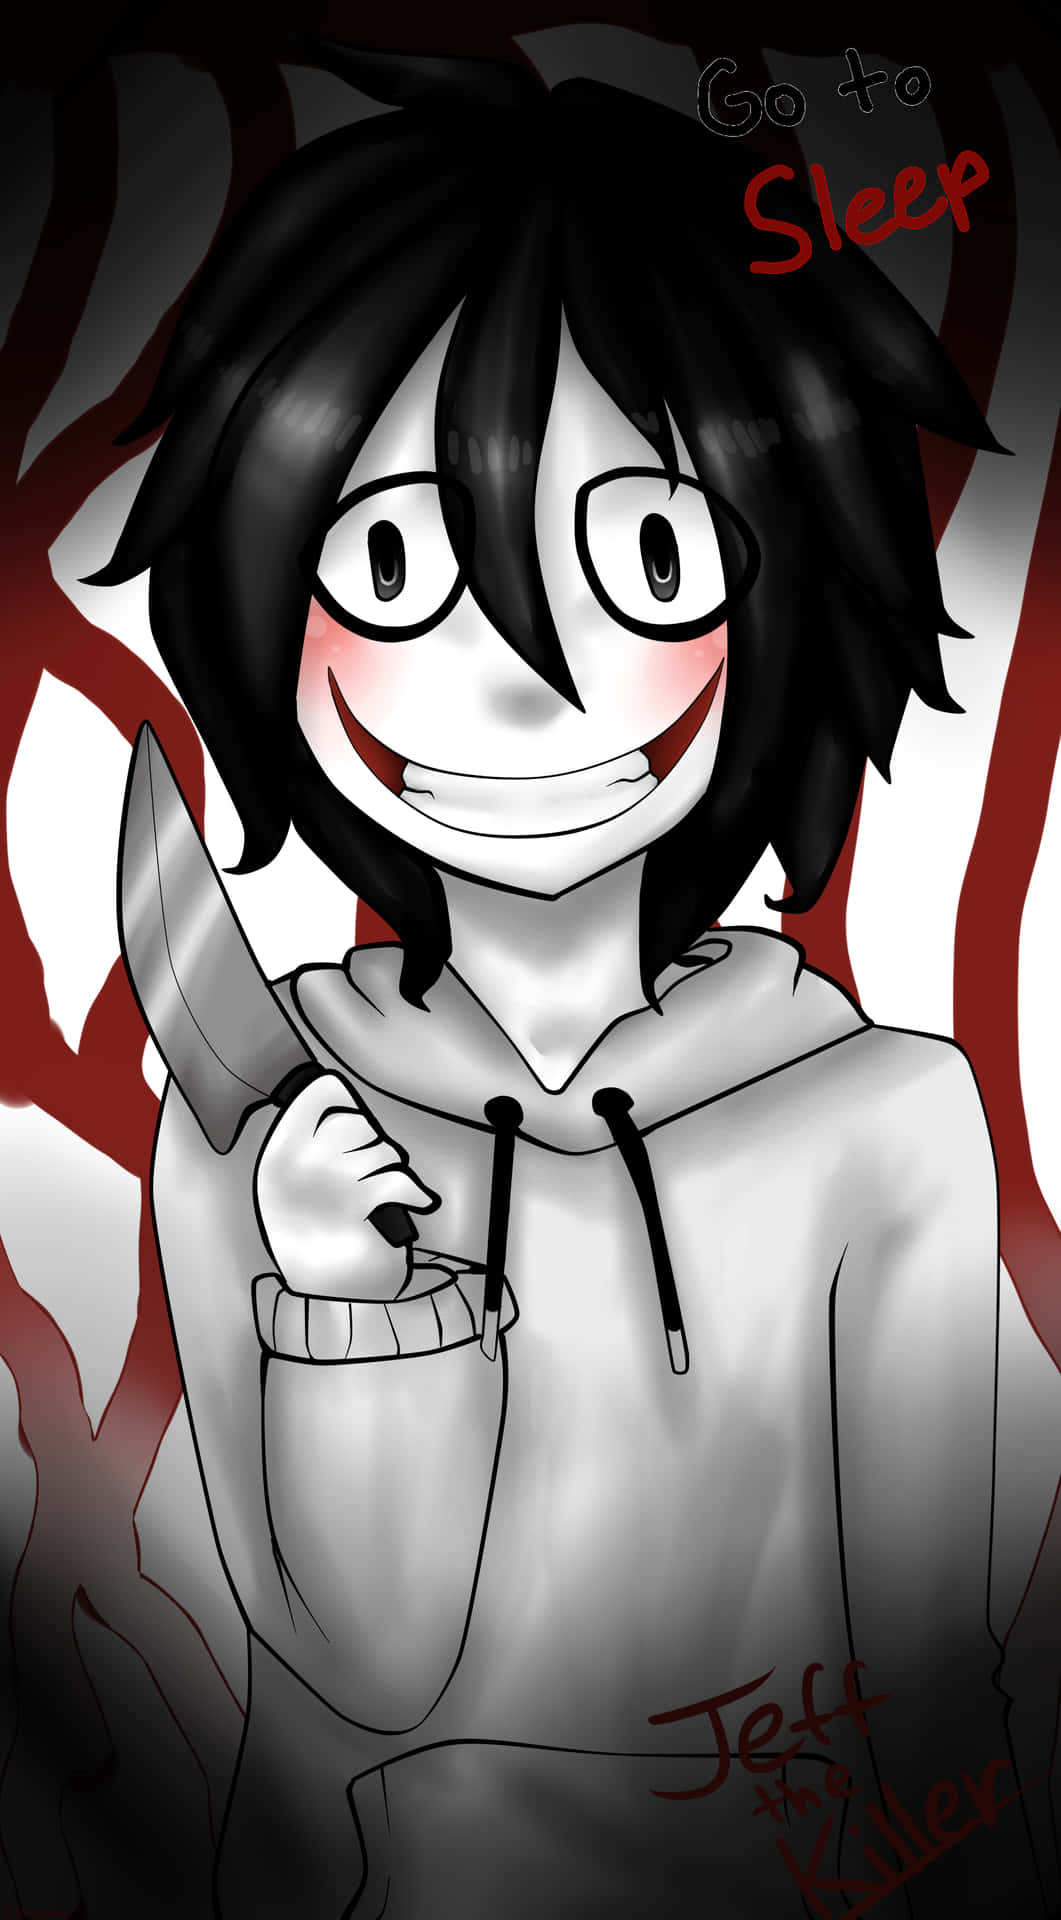 Jeff the killer-chan, AI Anime Girls as Creepypasta Images, jeff the killer  - thirstymag.com